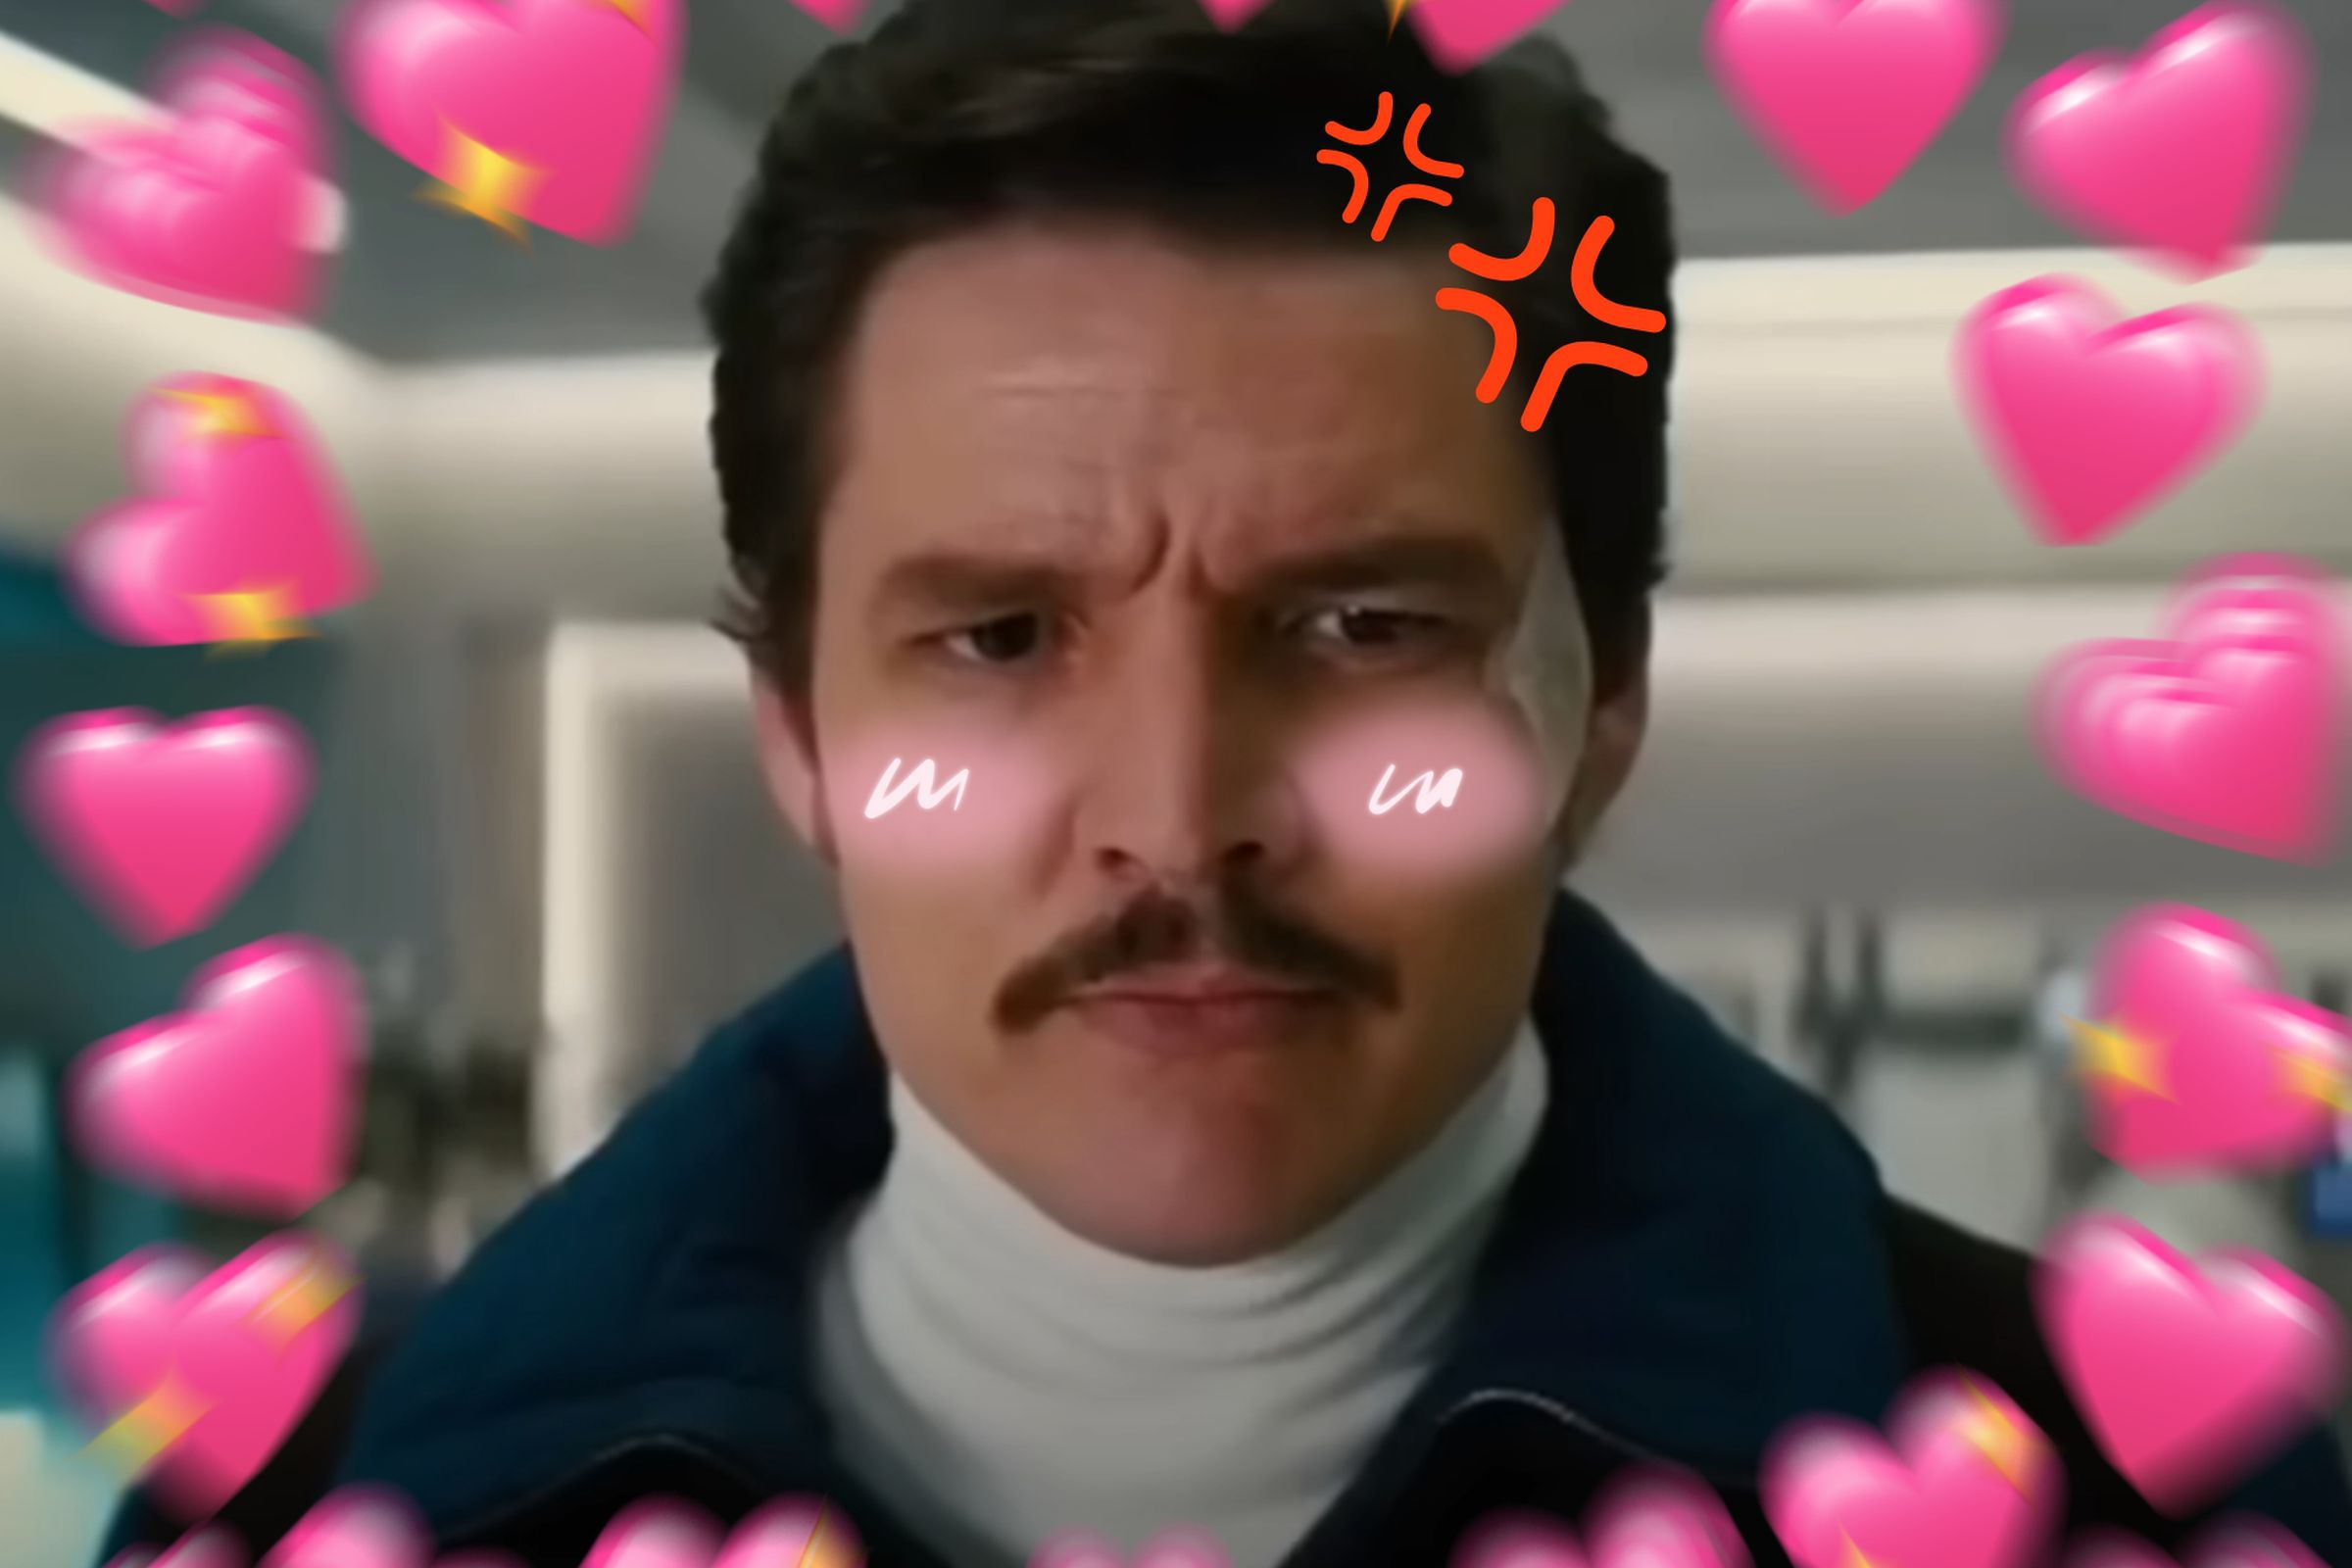 A screenshot of Pedro Pascal taken from Kingsman: The Golden Circle, edited to resemble a fandom reaction image.